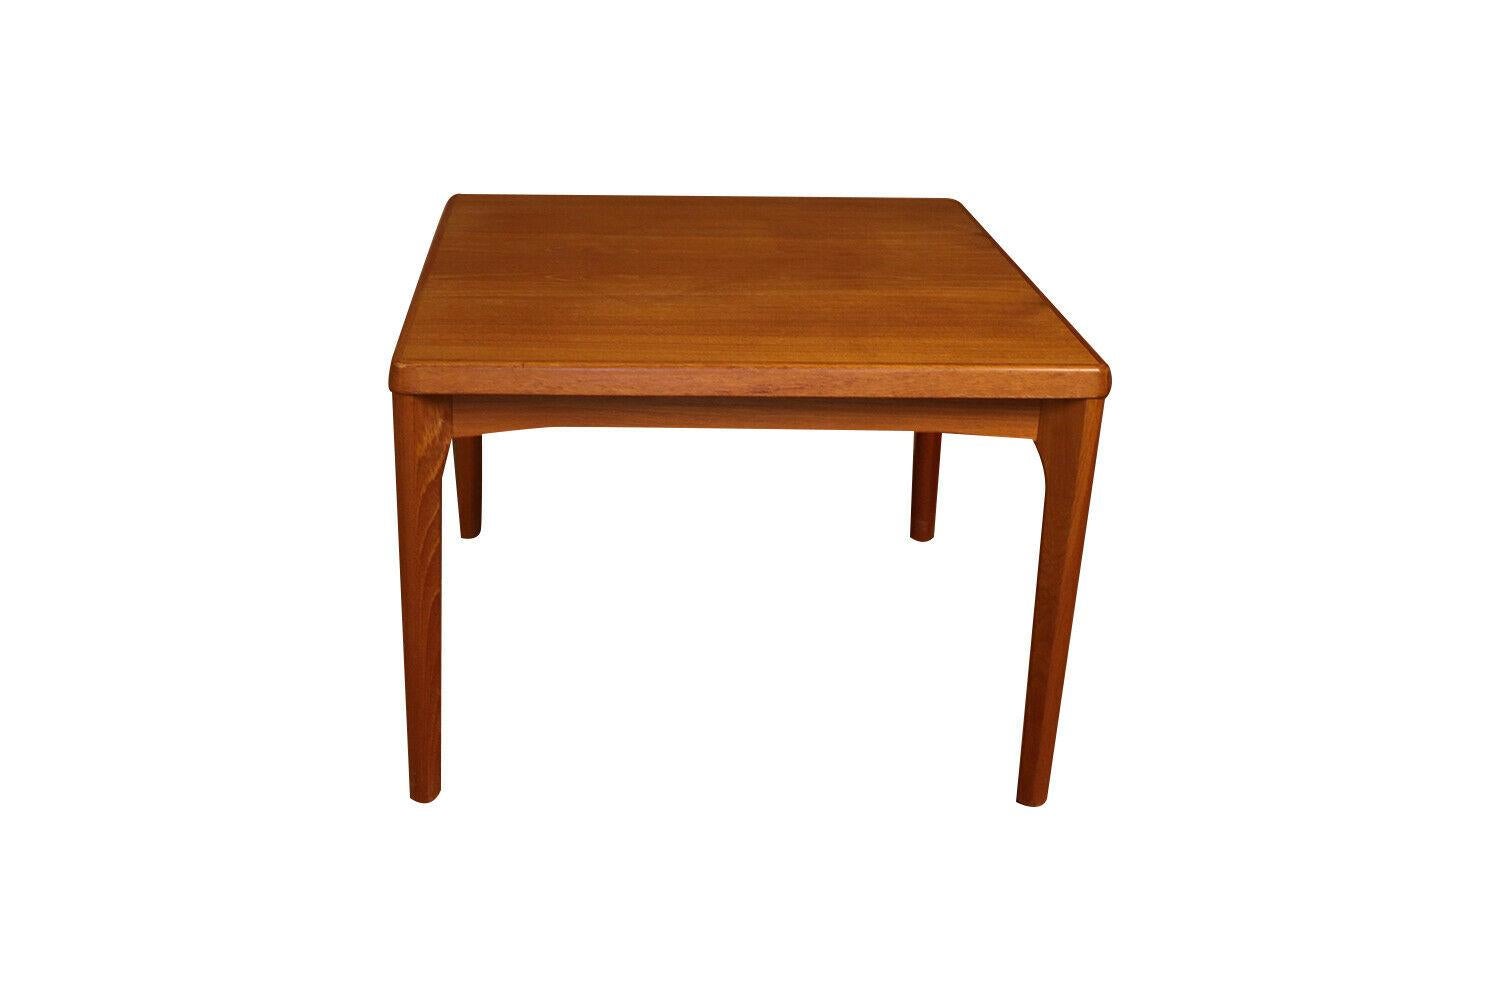 Exceptional Danish Modern teak, Mid Century Modern, vintage Scandinavian design, teak, side table by Vejle Stole & Mobelfabrik, made in Denmark. Features a square top with rounded edges and a beautiful rich teak color throughout. Resting on sturdy